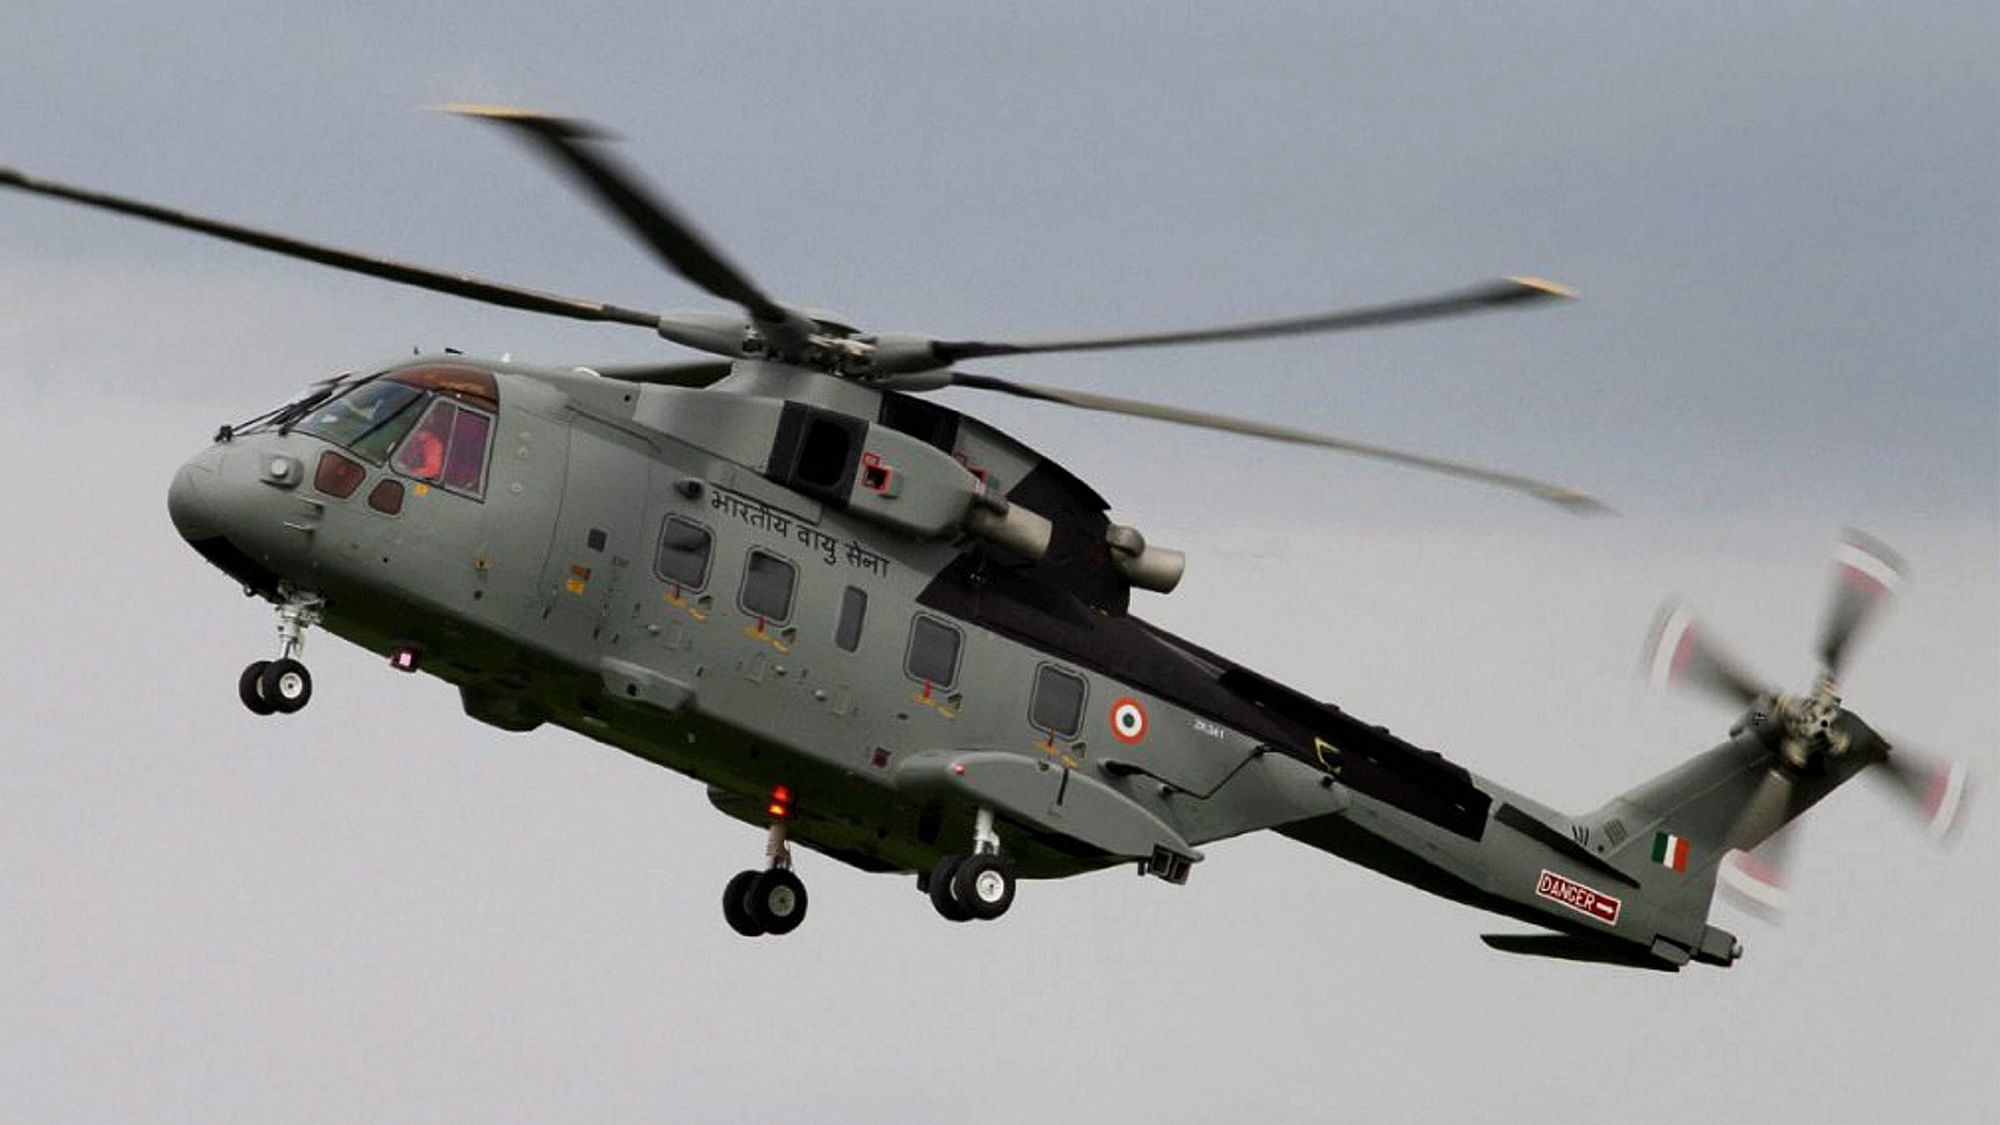 File photo of AgustaWestland helicopter.